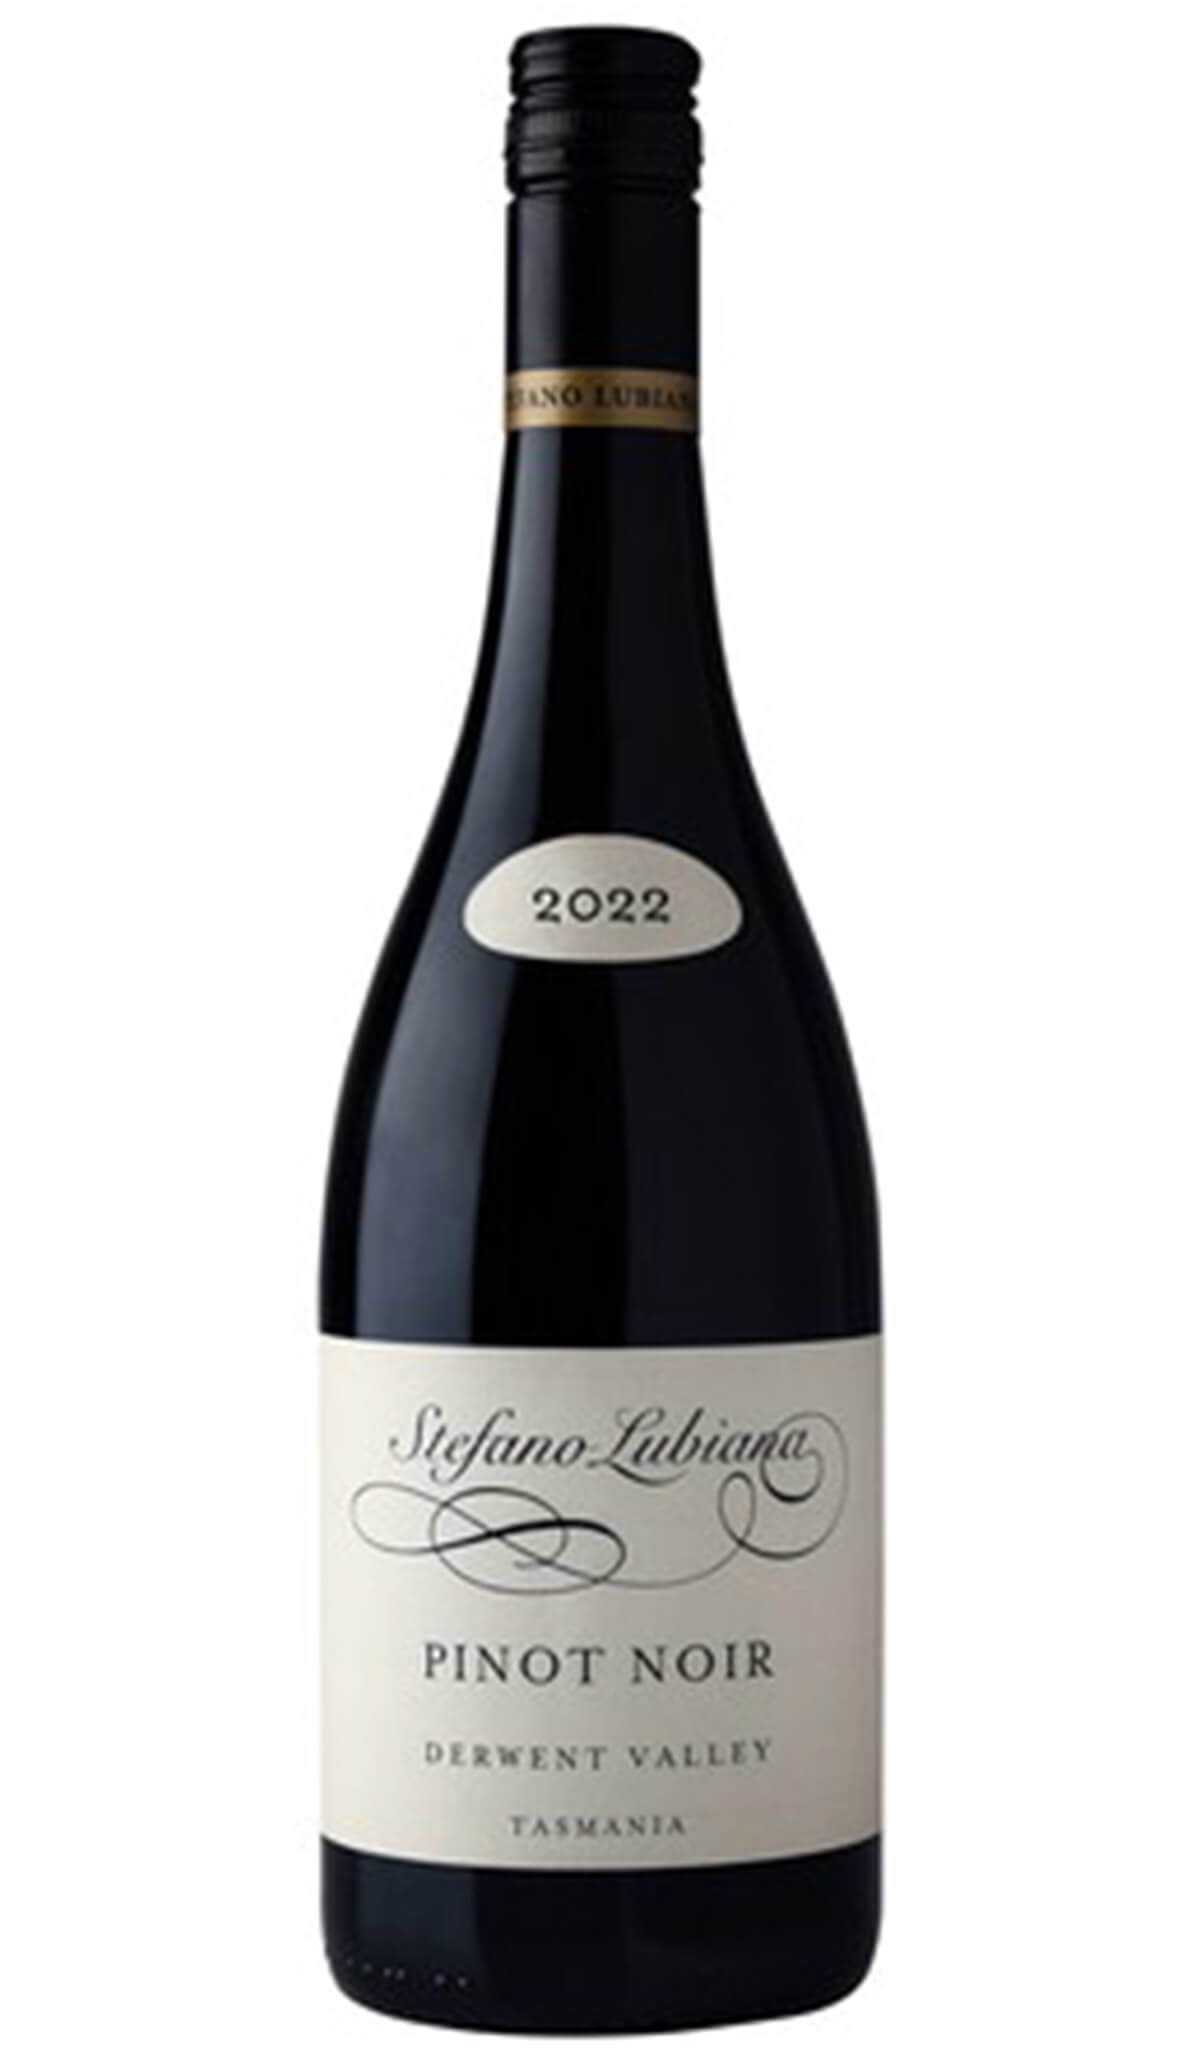 Find out more or buy Stefano Lubiana Estate Pinot Noir 2022 (Tasmania) online at Wine Sellers Direct - Australia’s independent liquor specialists.